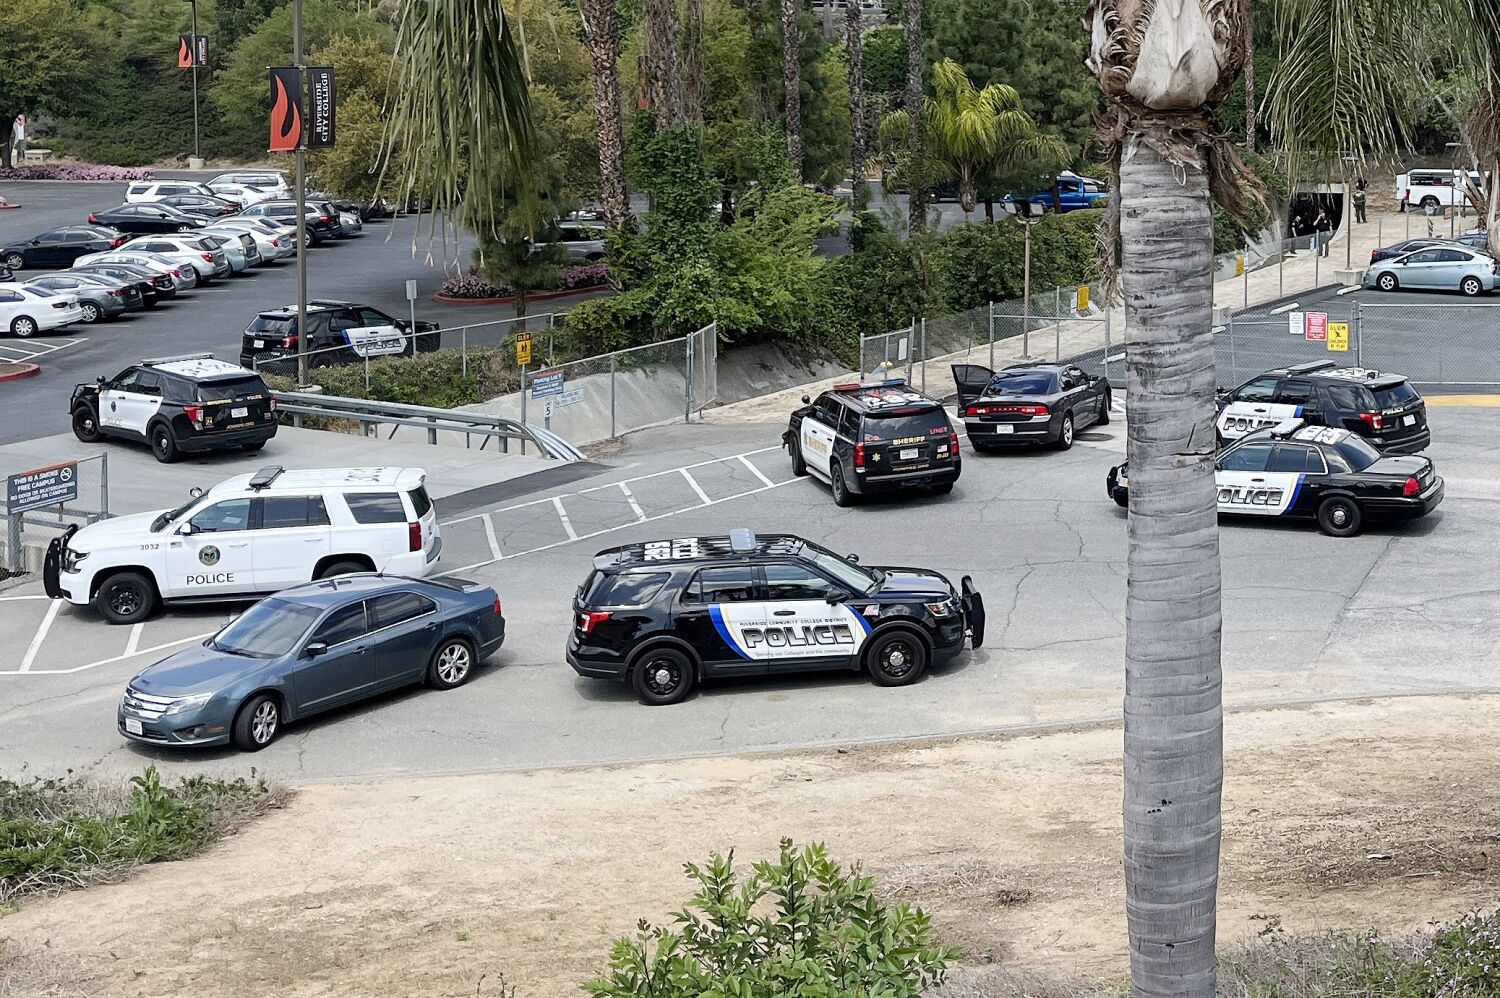 Riverside City College locked after person